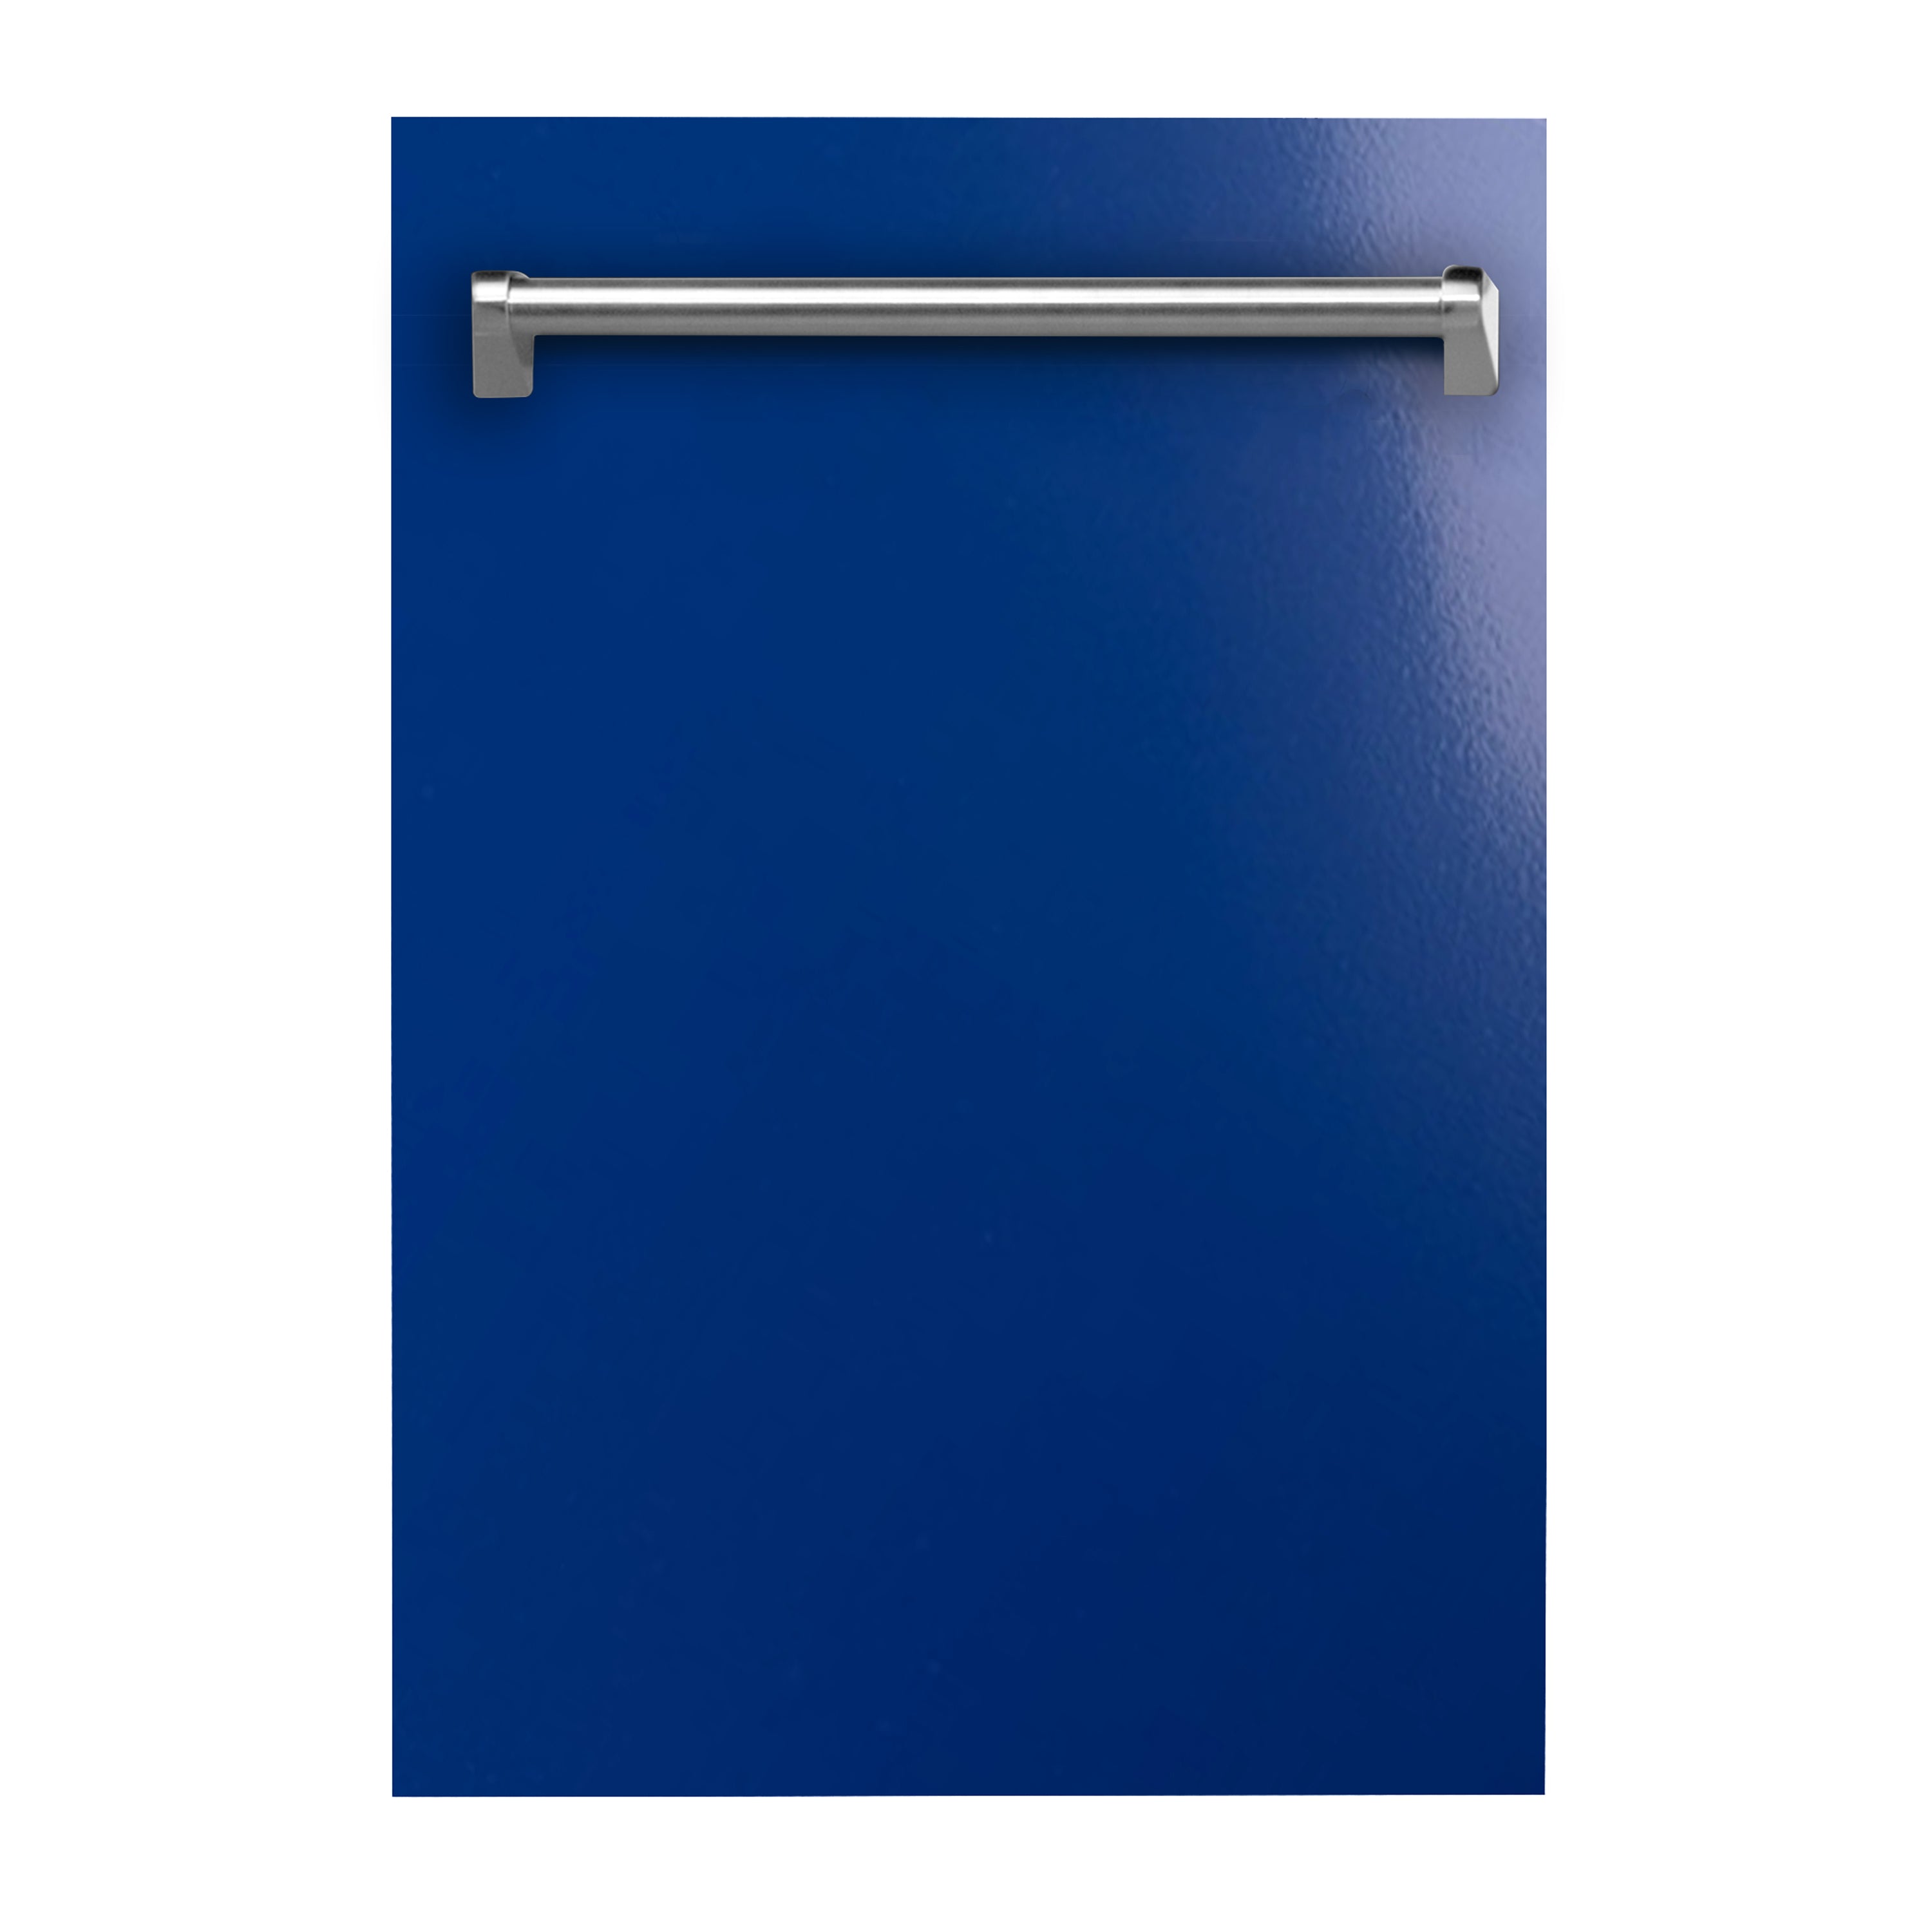 ZLINE 18" Dishwasher Panel in Blue Gloss with Traditional Handle (DP-BG-18)